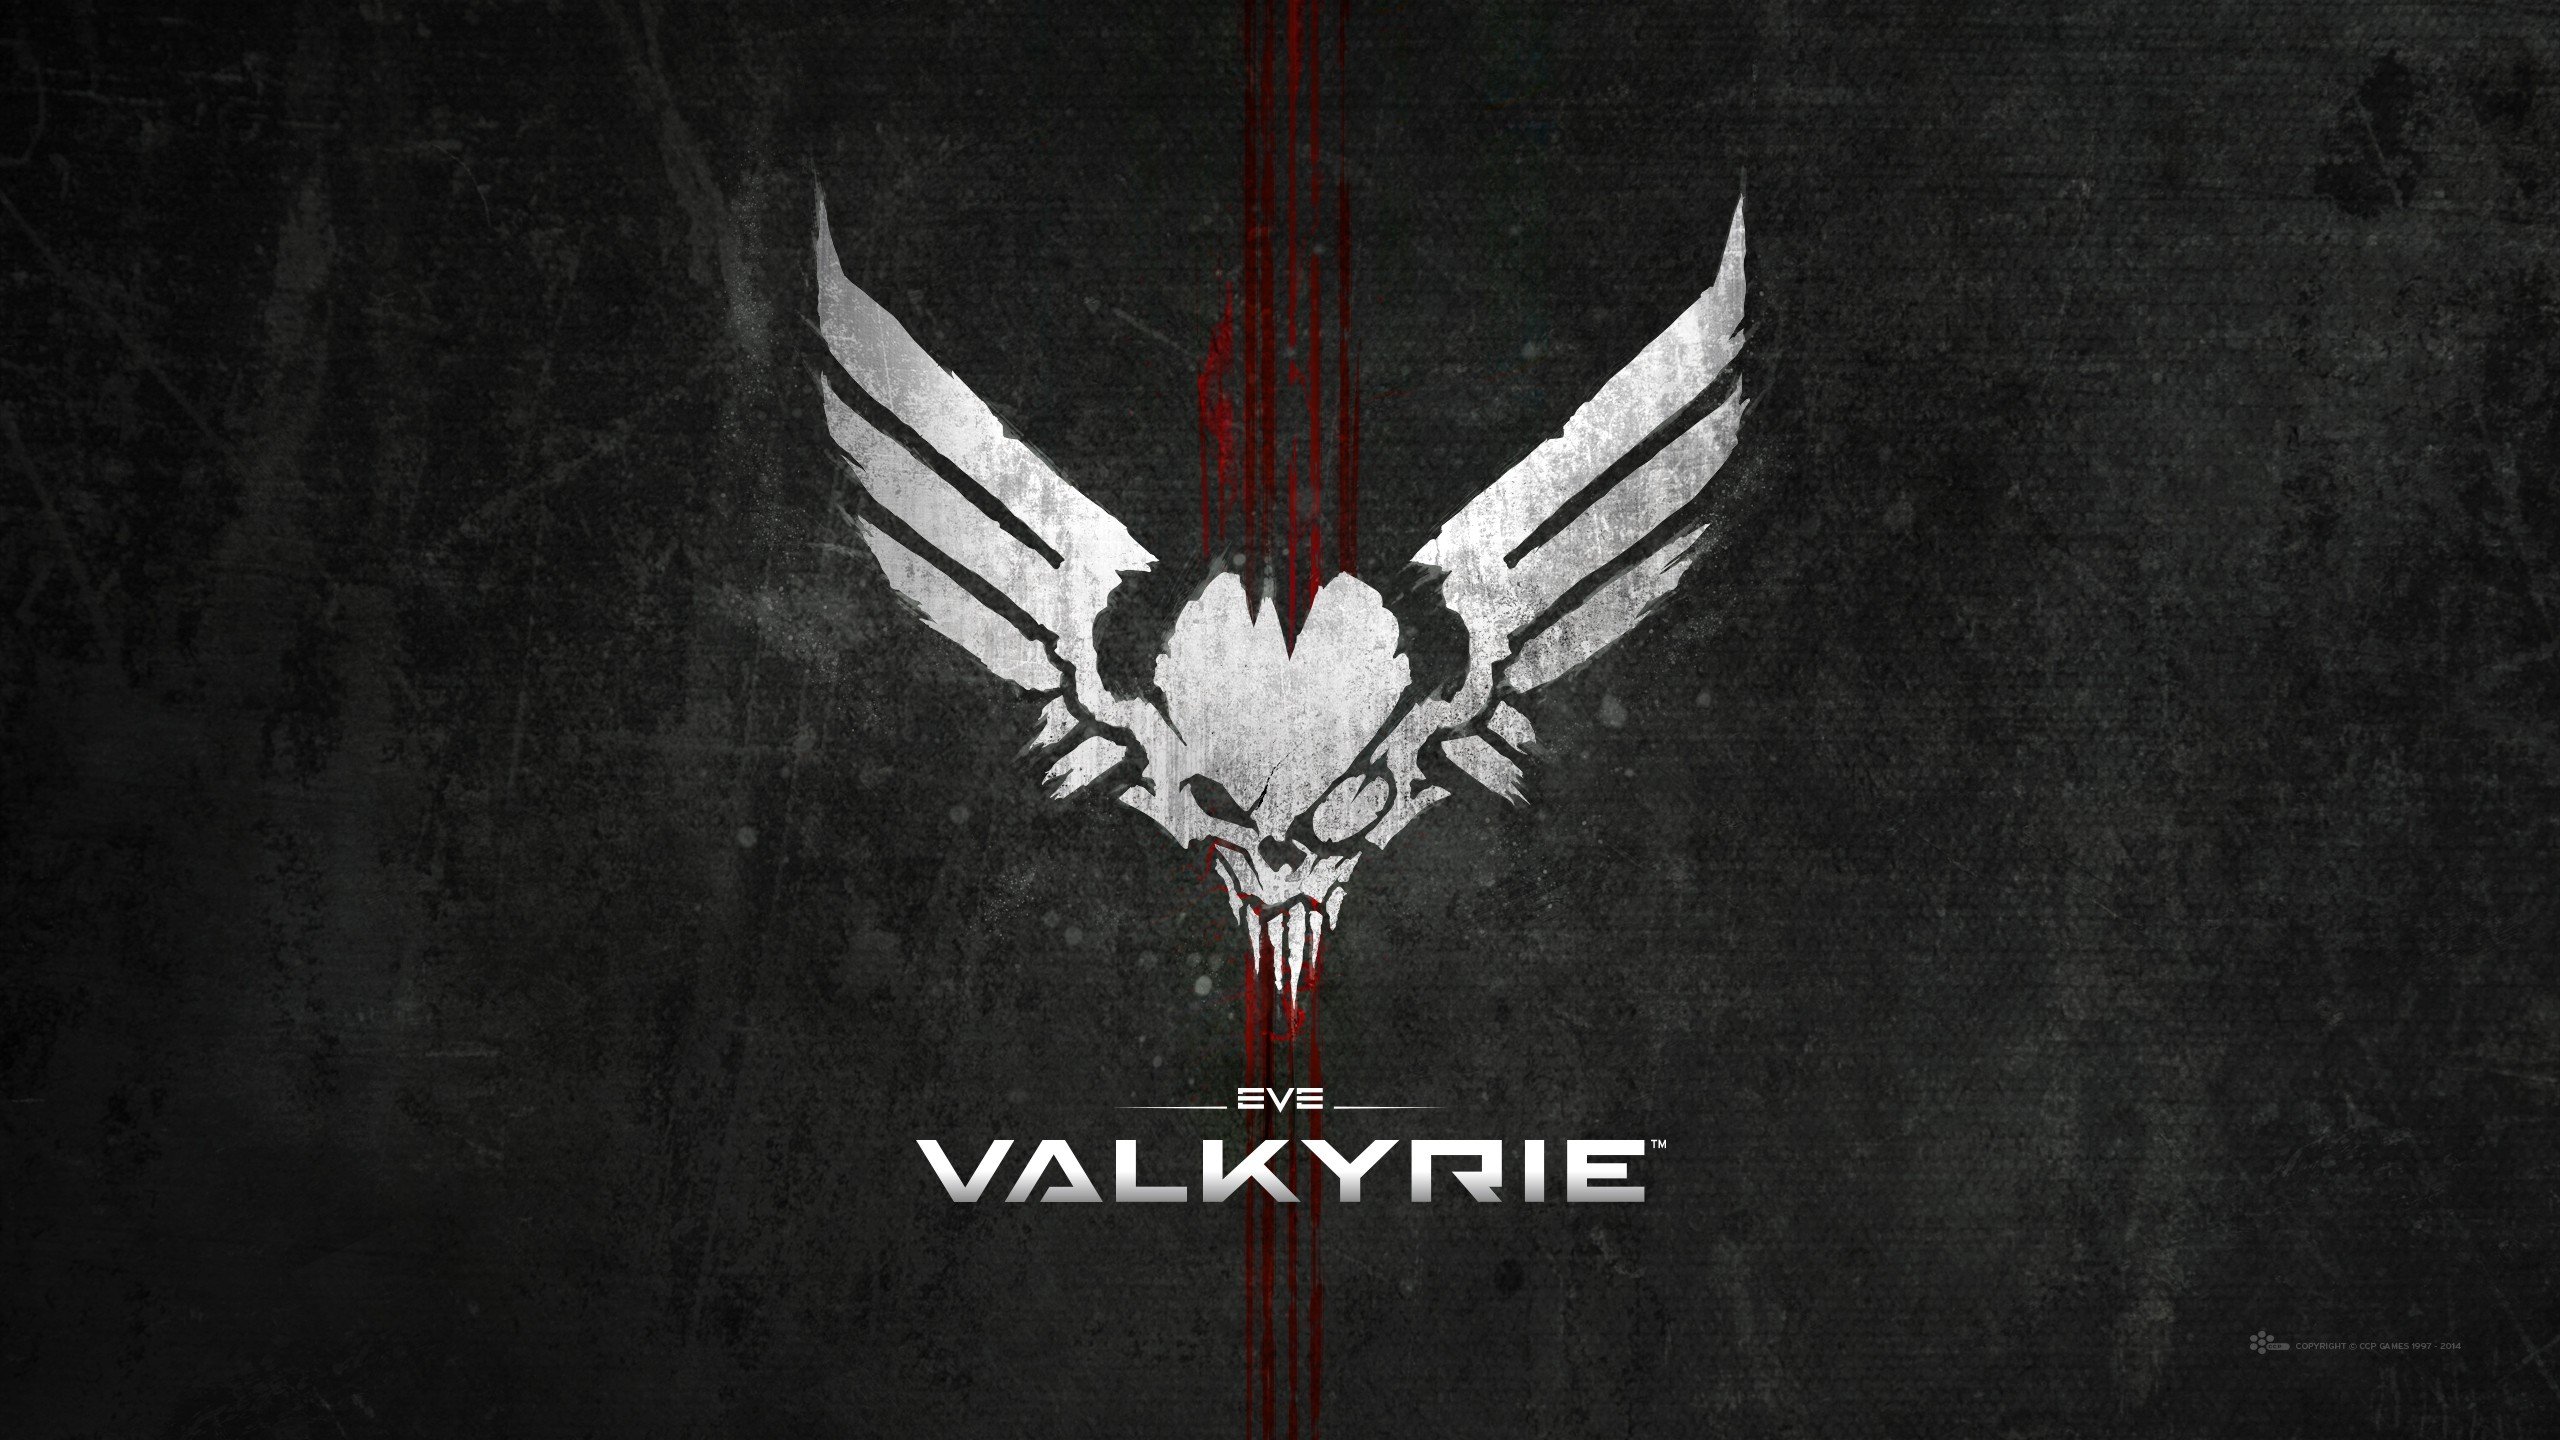 EVE Valkyrie, EVE Online, PC gaming, Virtual reality Wallpaper